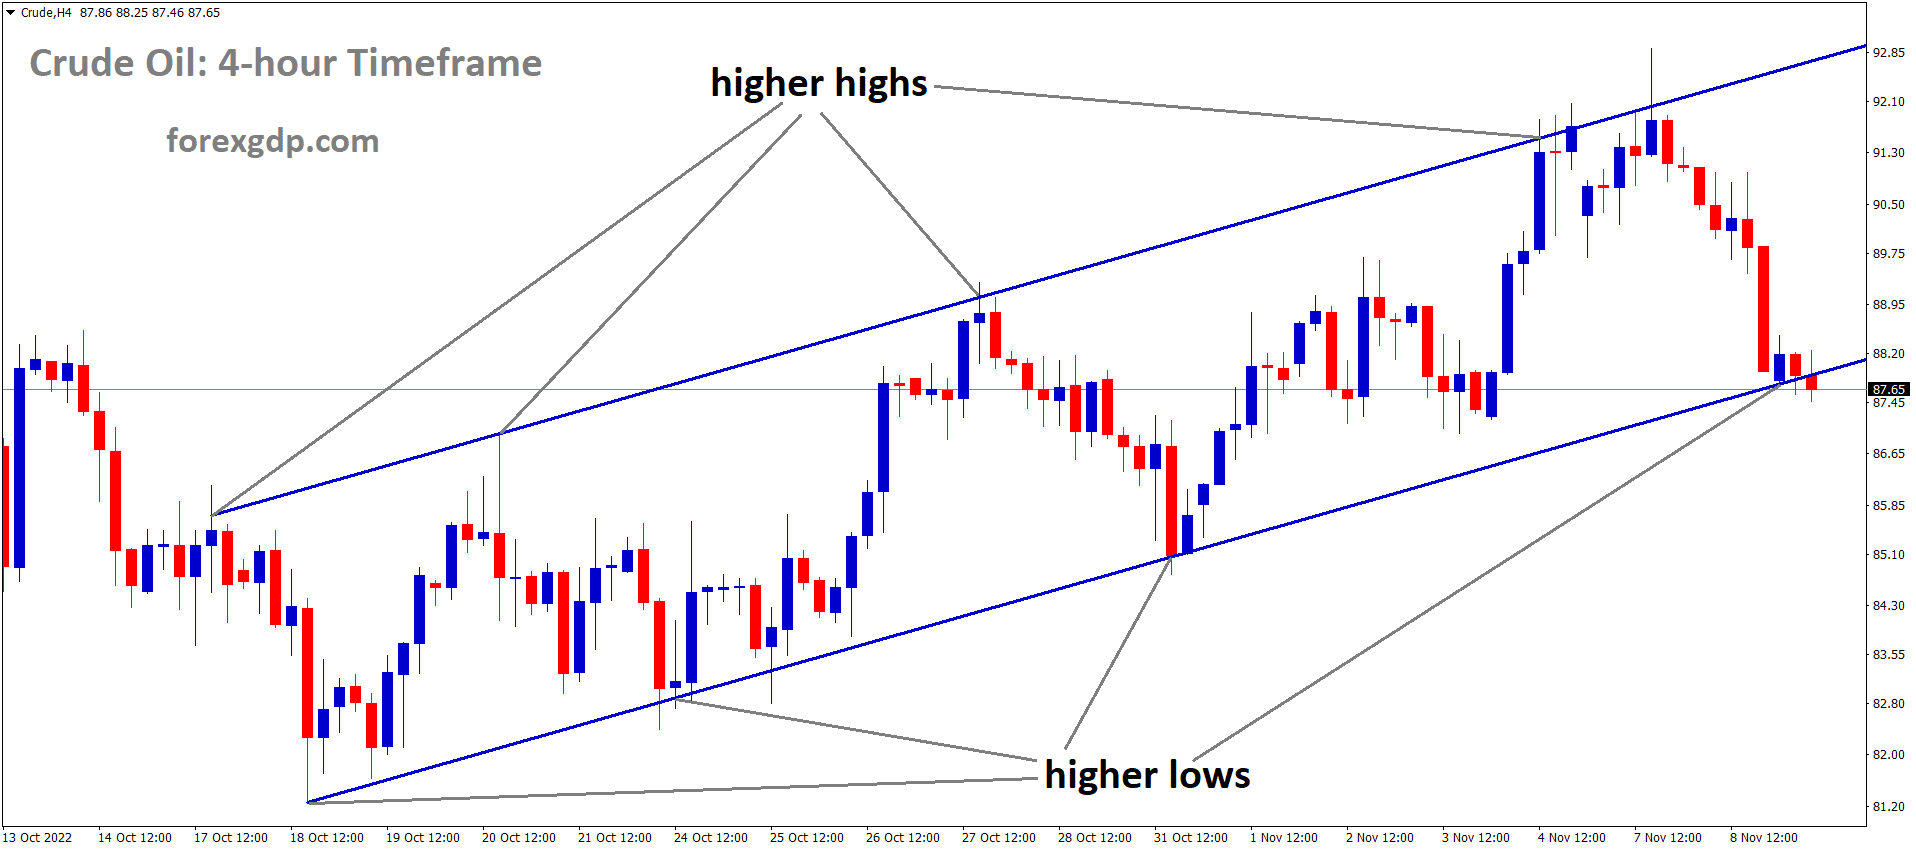 Crude oil is moving in an Ascending channel and the market has reached the higher low area of the channel